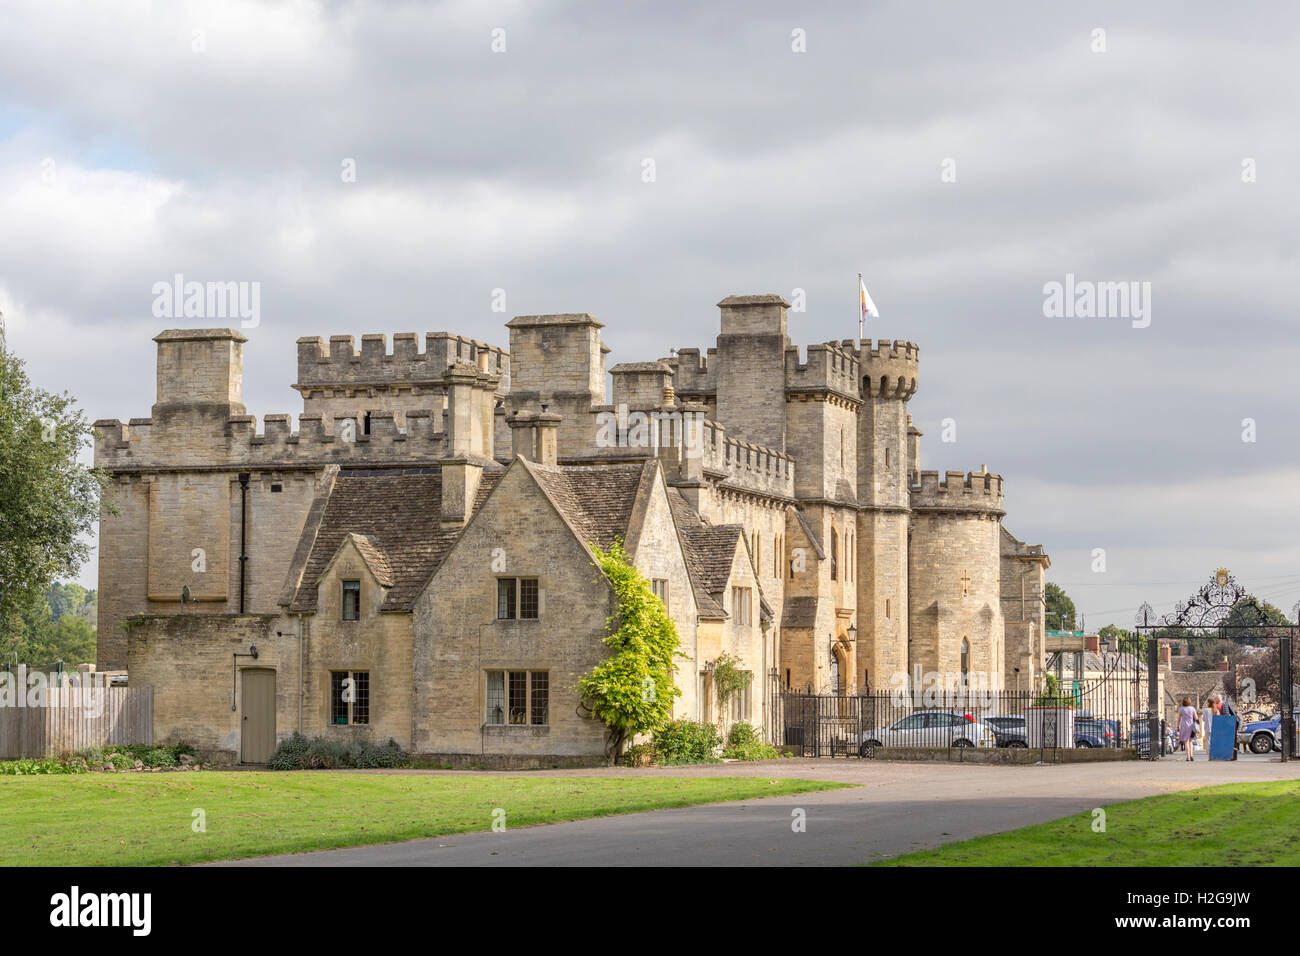 Cecily Hill Barracks at the entrance to Cirencester Park, Cirencester, Gloucestershire, England, UK Stock Photo